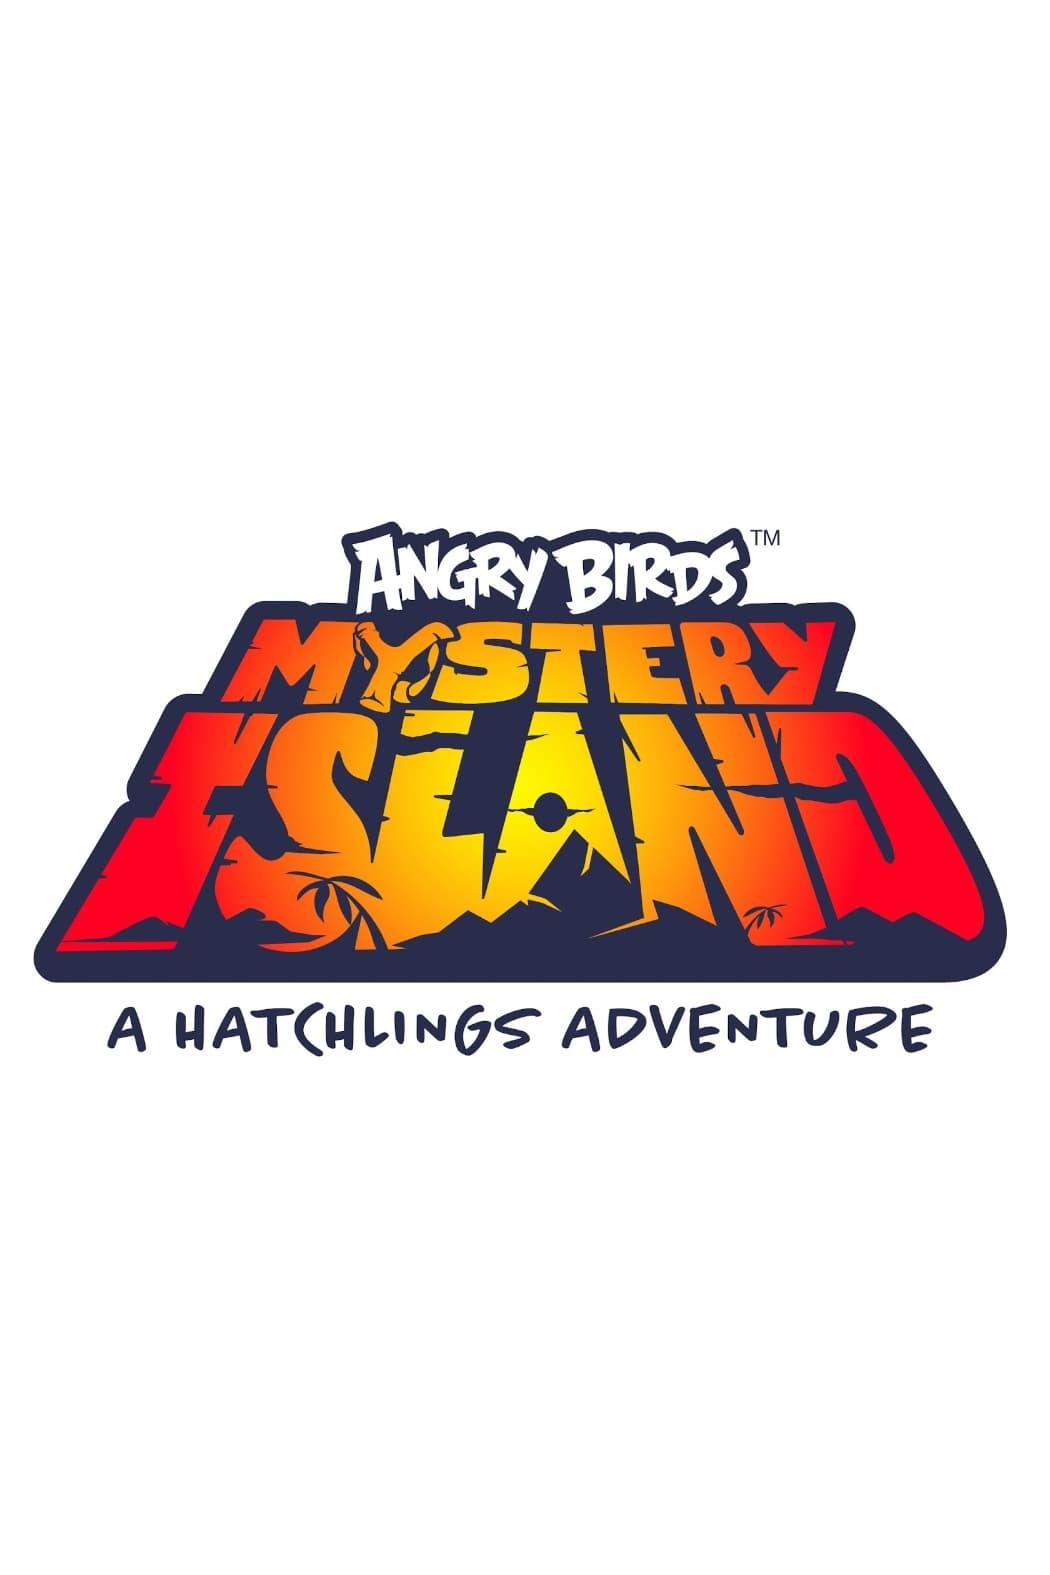 Angry Birds Mystery Island poster